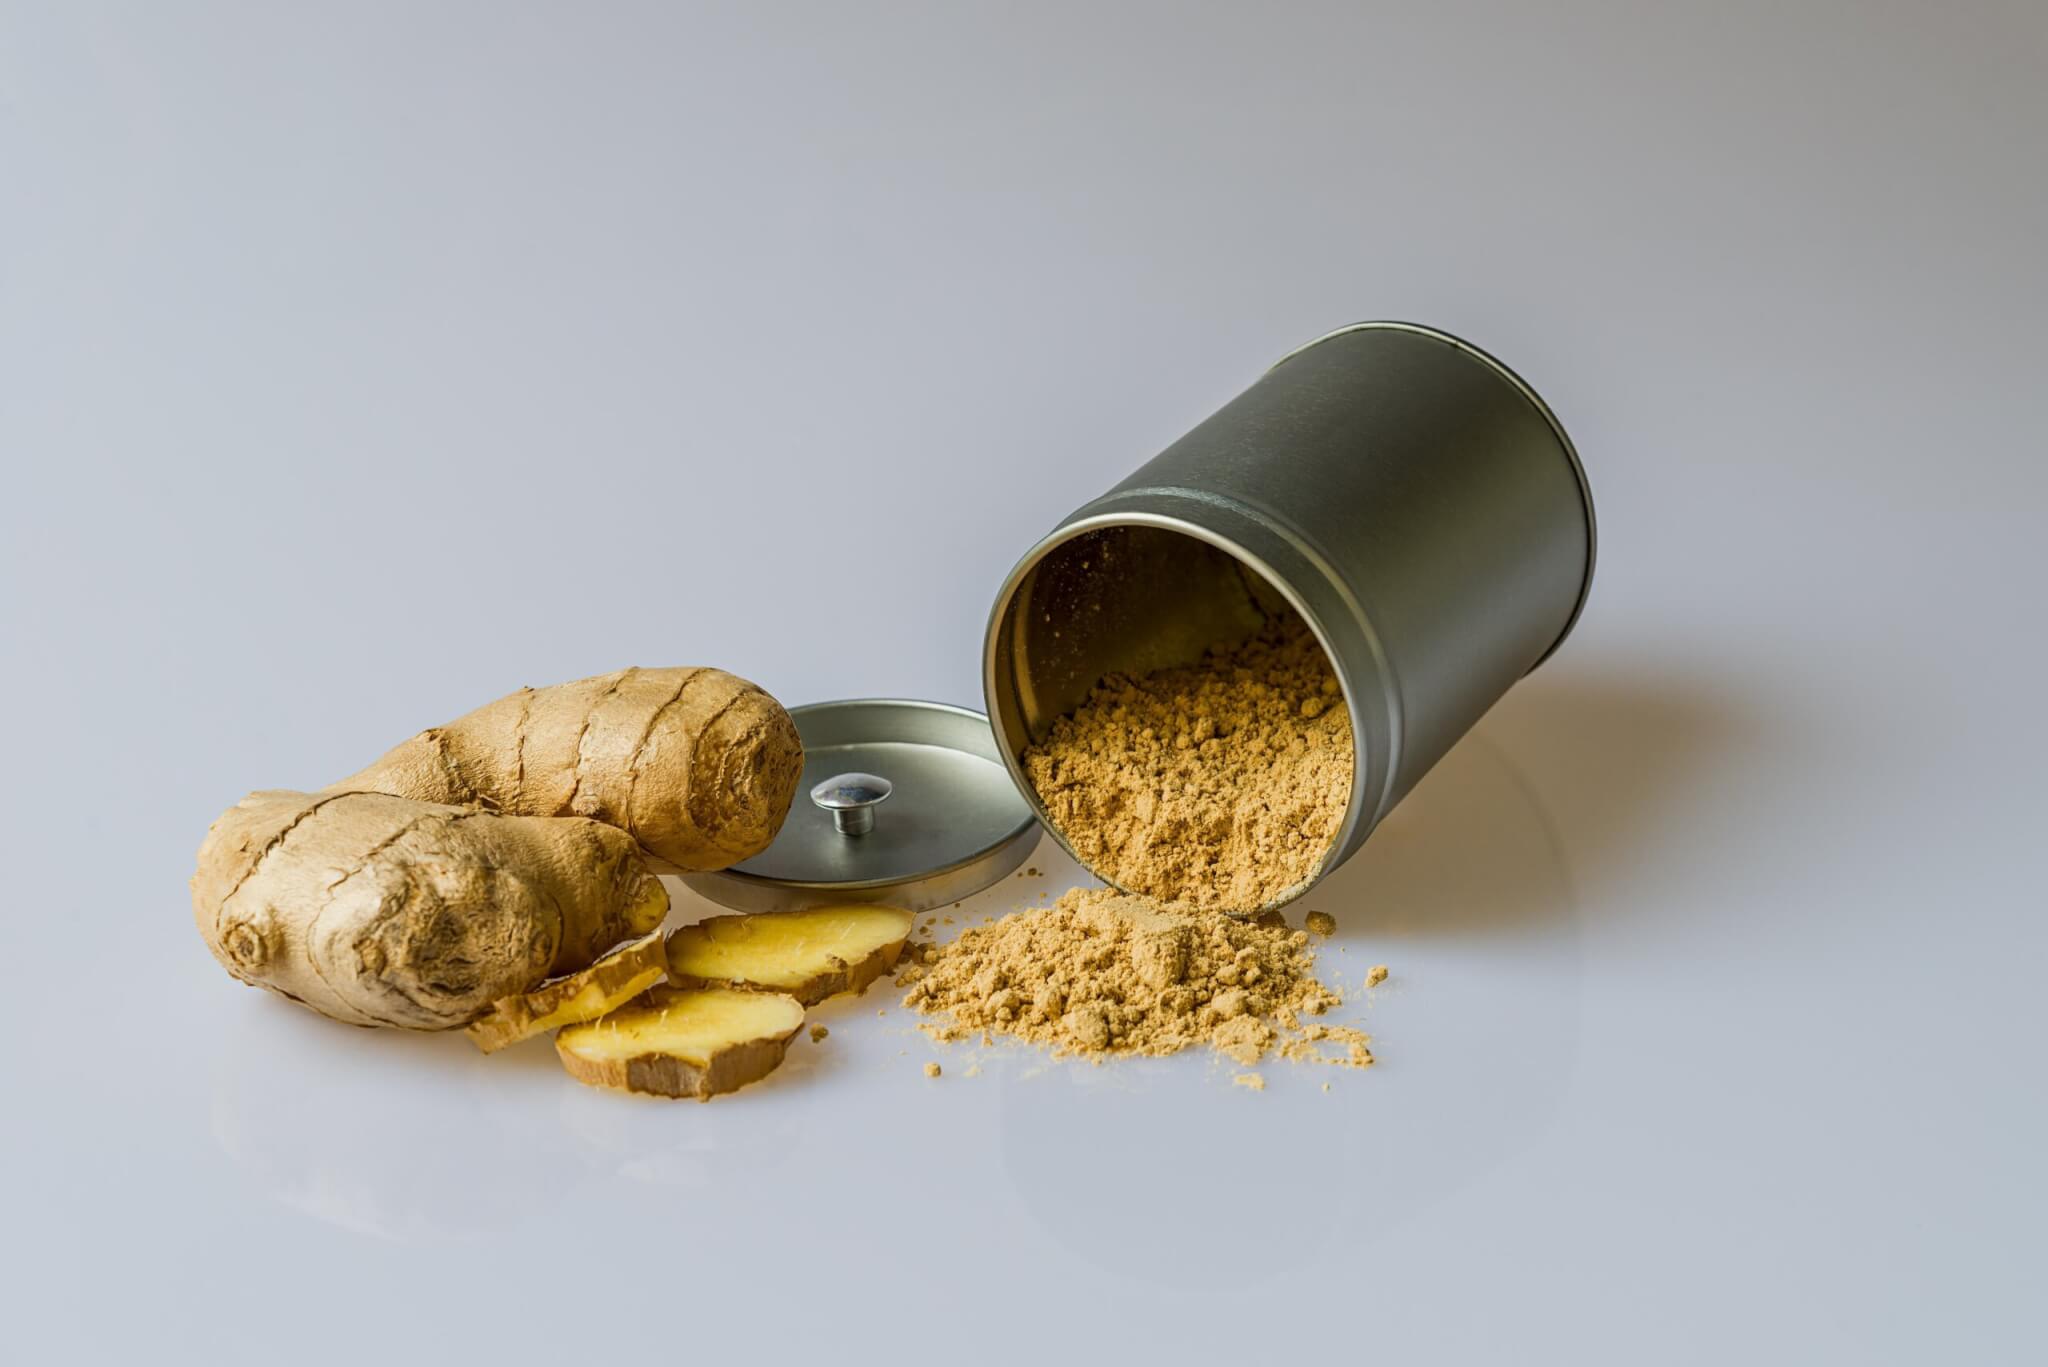 Ginger is used today in its raw form and spice form. It is also used for medicinal and culinary exploits.